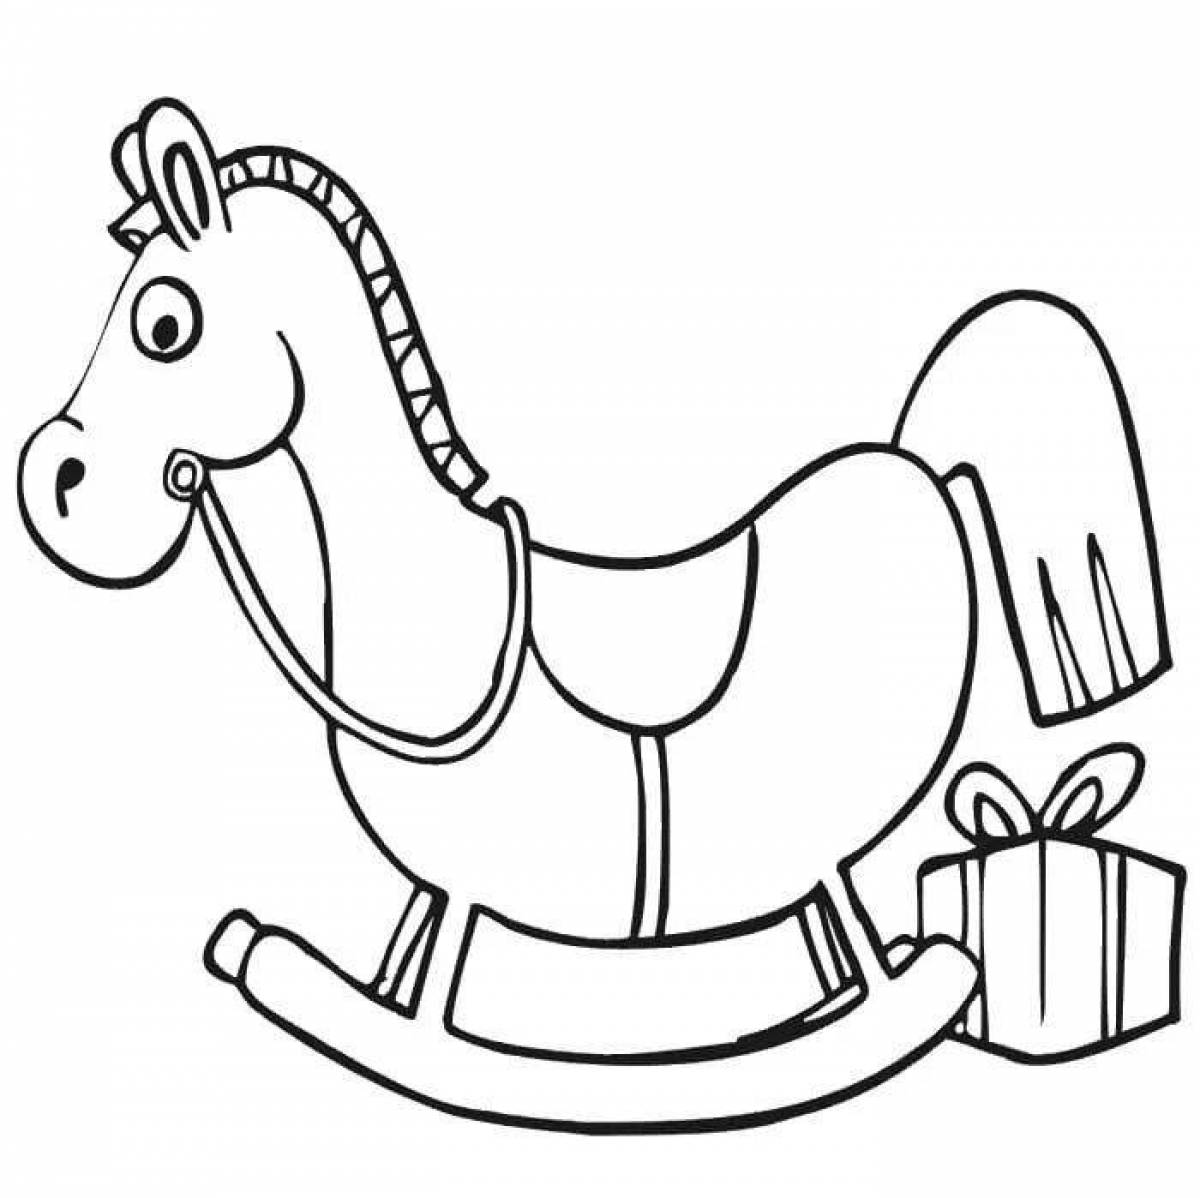 Coloring book funny rocking horse